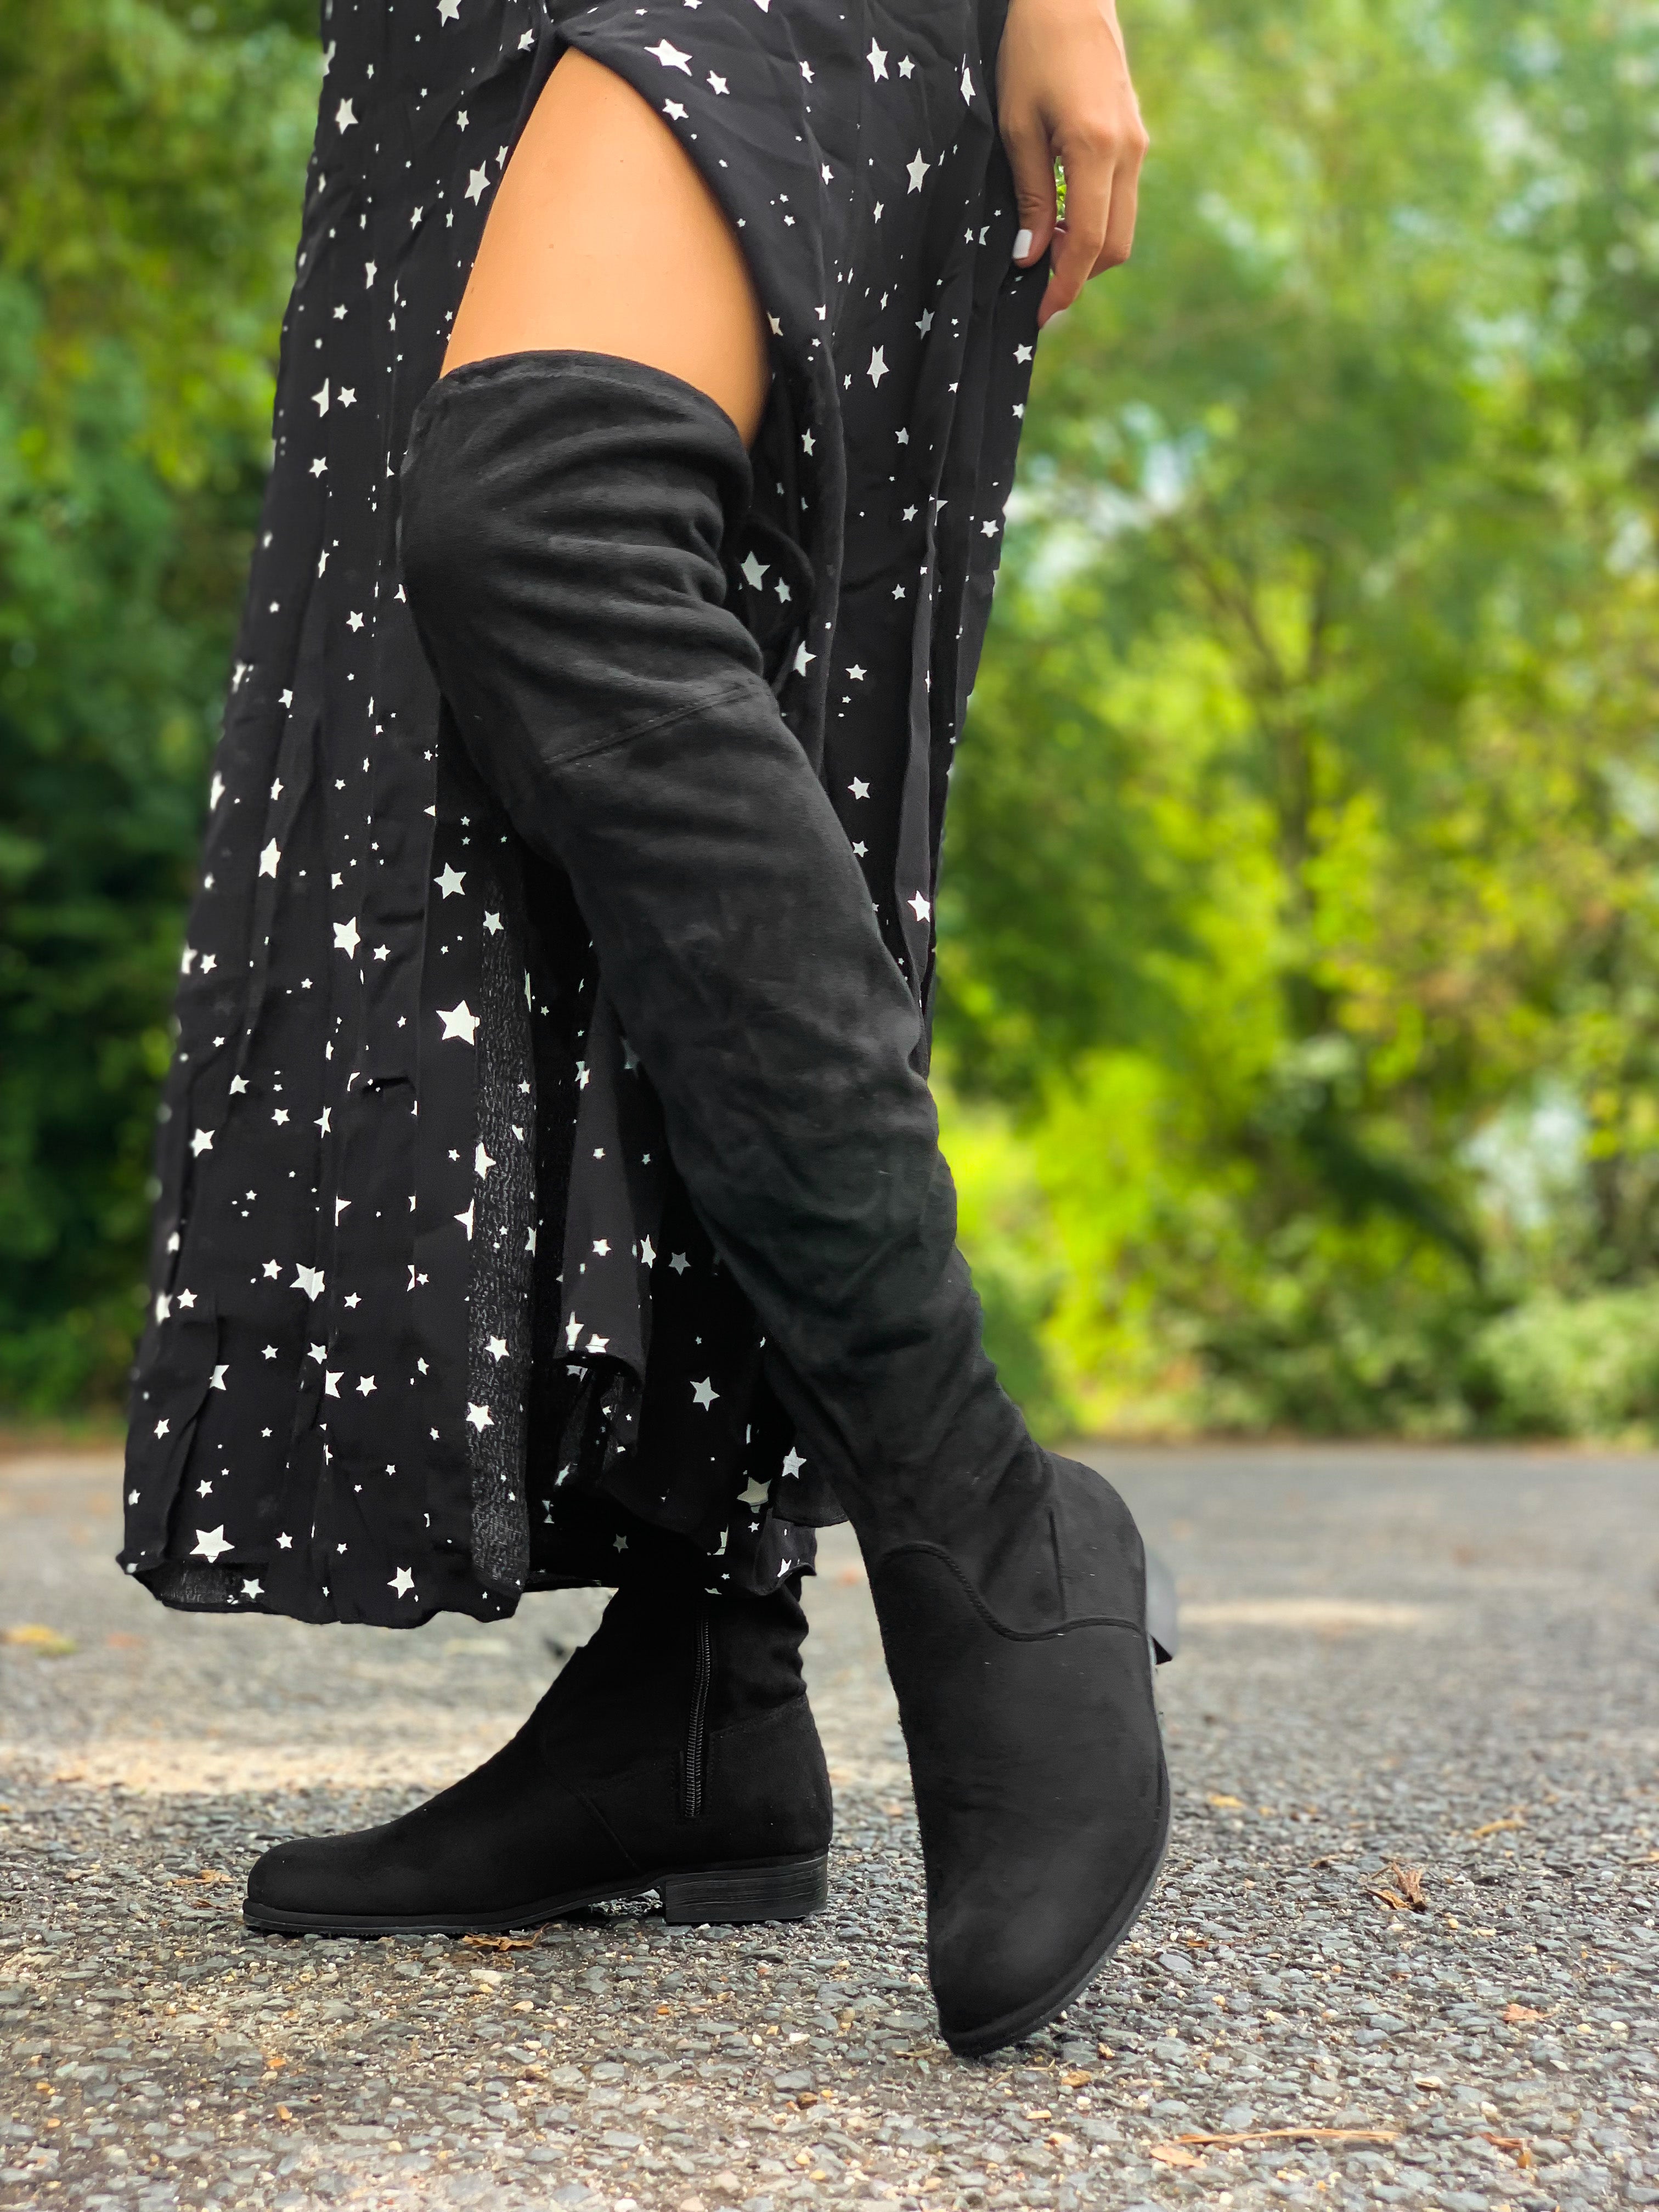 Over The Knee Flat Black Boots